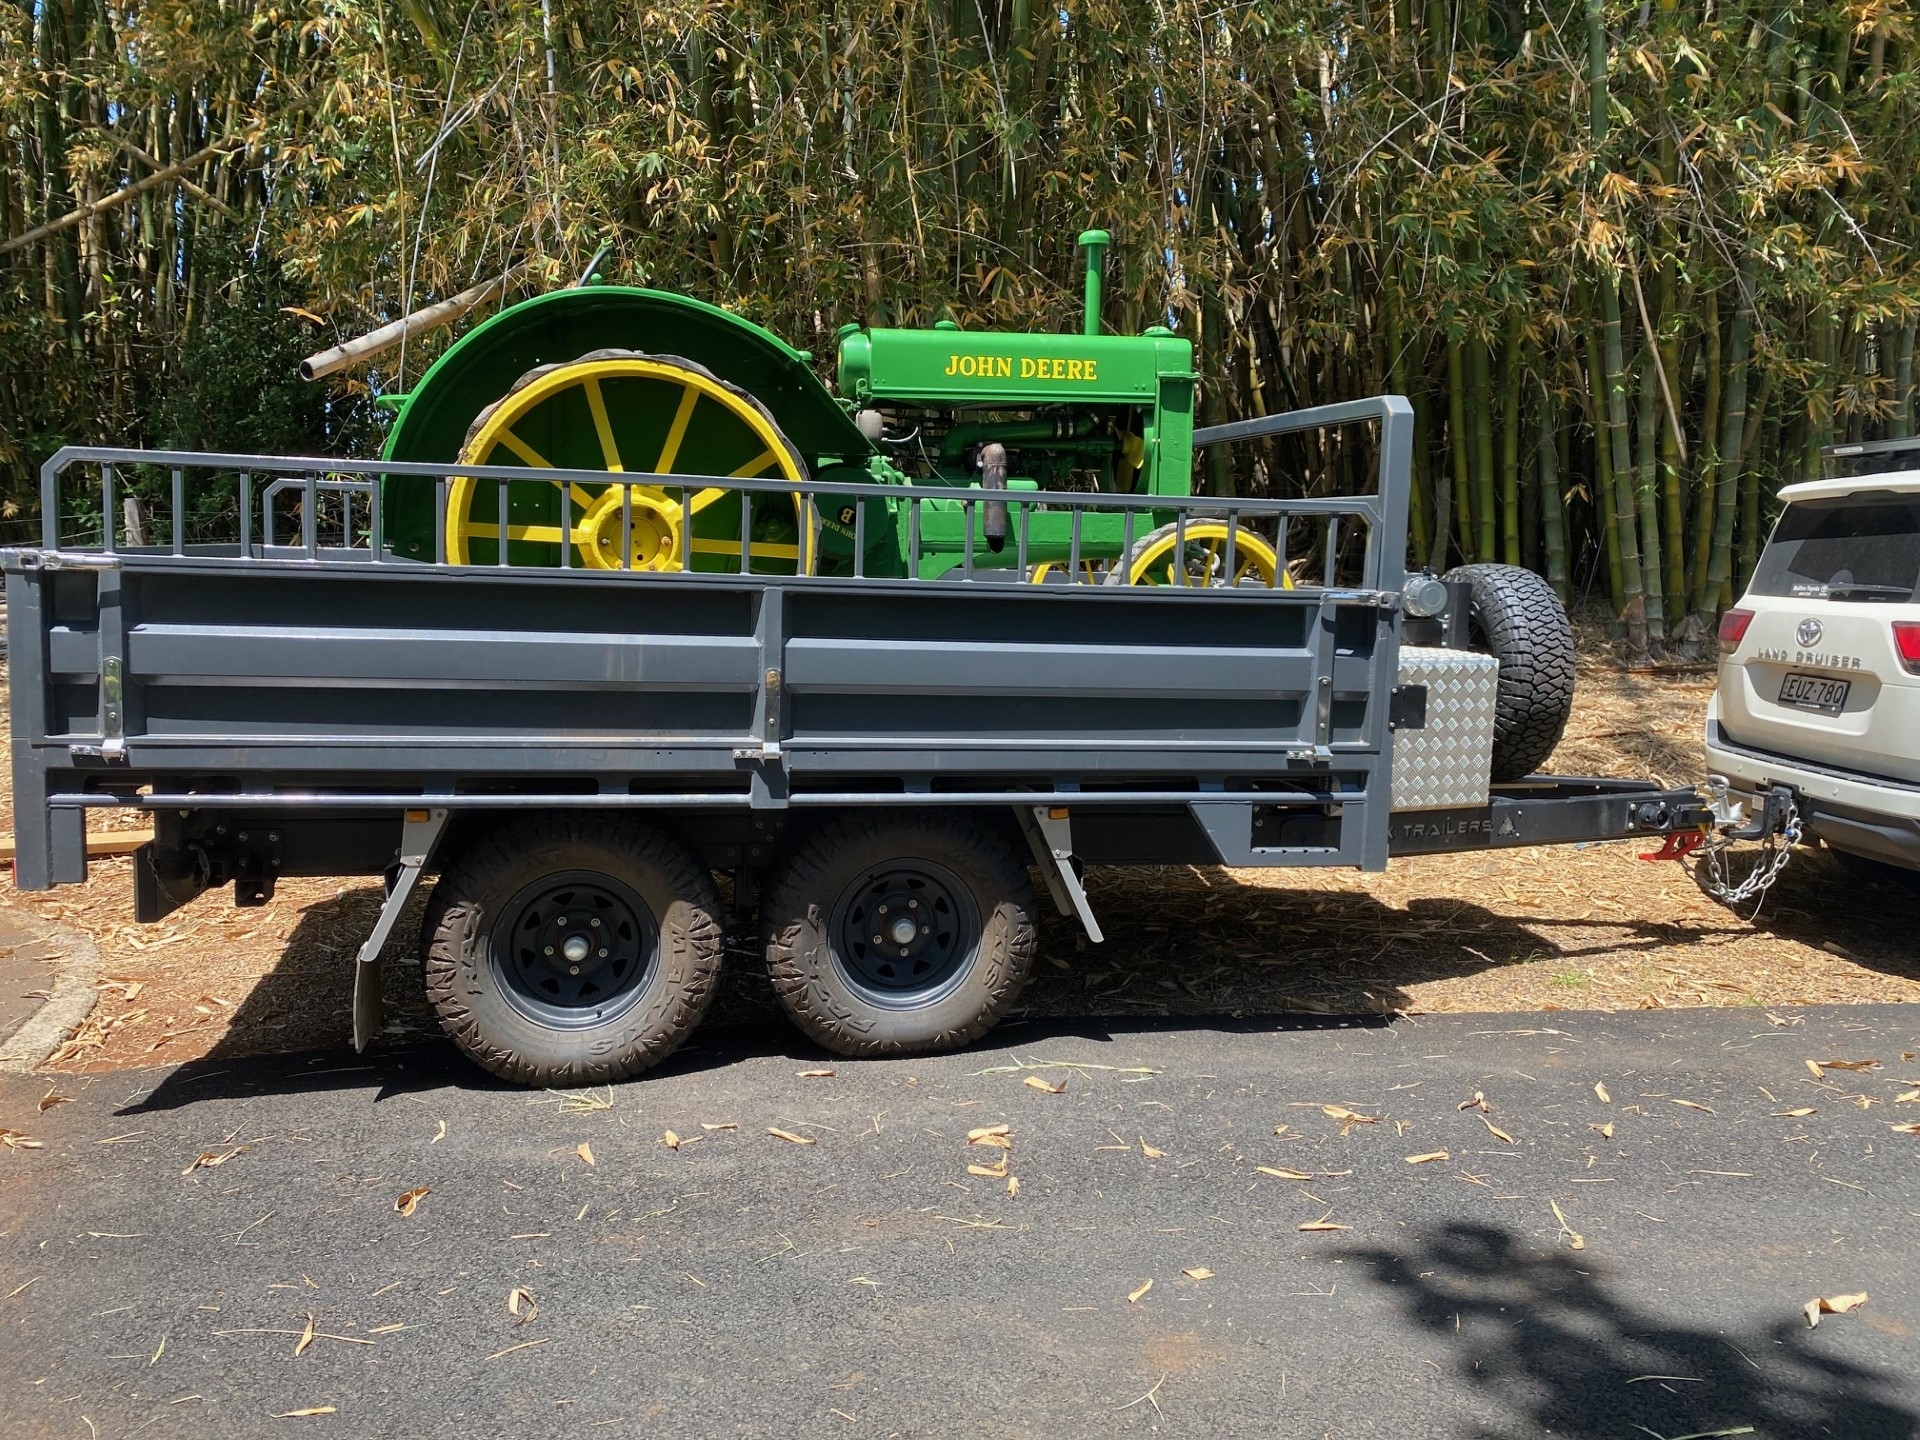 A Rear Tipper Trailer with vintage John Deere tractor on tray being towed behind Toyota Landcruiser. The trailer has hi-volume extender Dropsides and tandem axles with Maxxis Razr All Terrain Tyres.